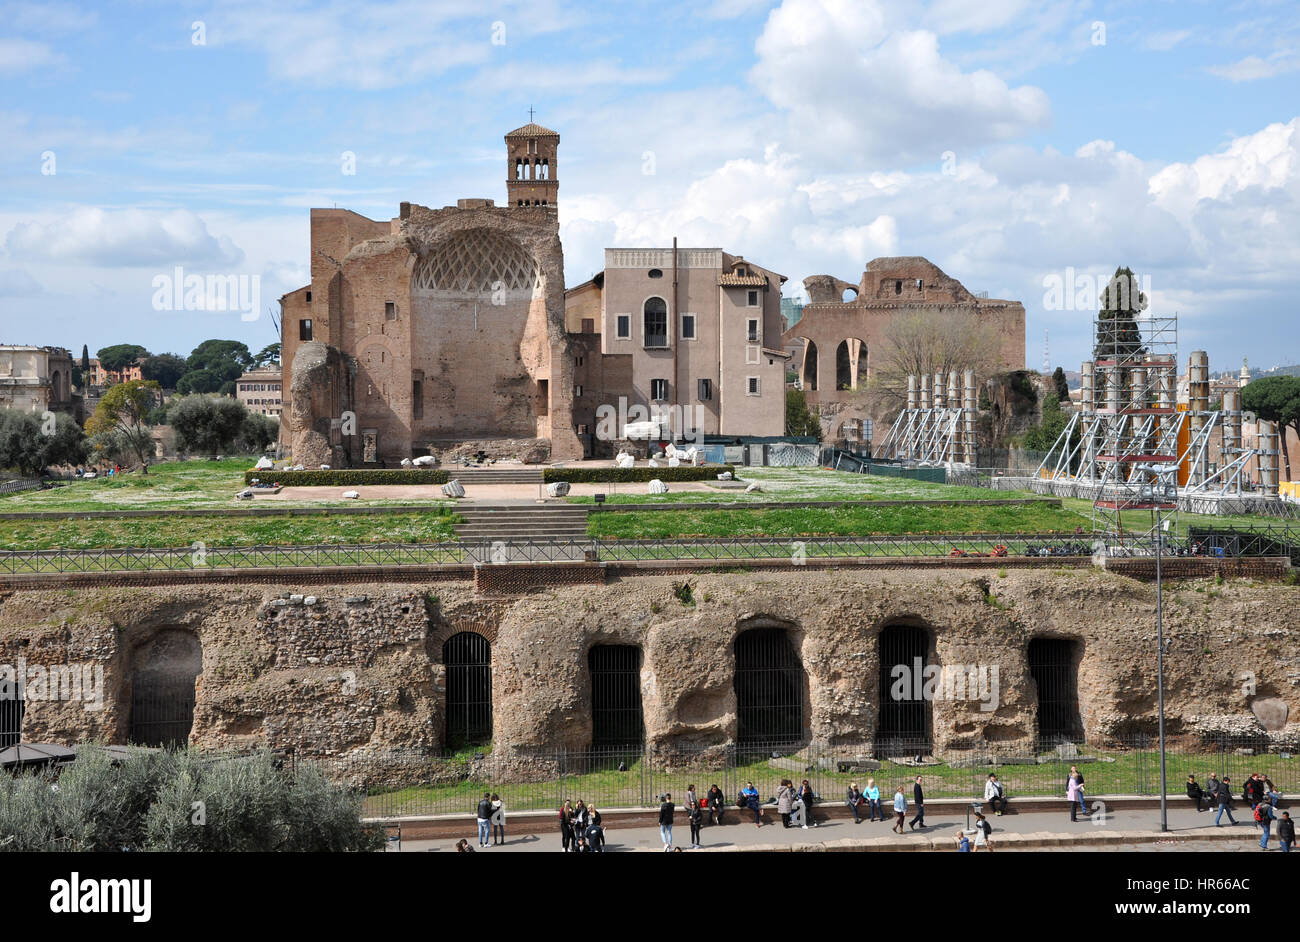 ROME, ITALY - MARCH 15, 2016: Tourists visiting the Domus Aurea, built by Emperor Nero in Rome, in the Roman Forum Stock Photo